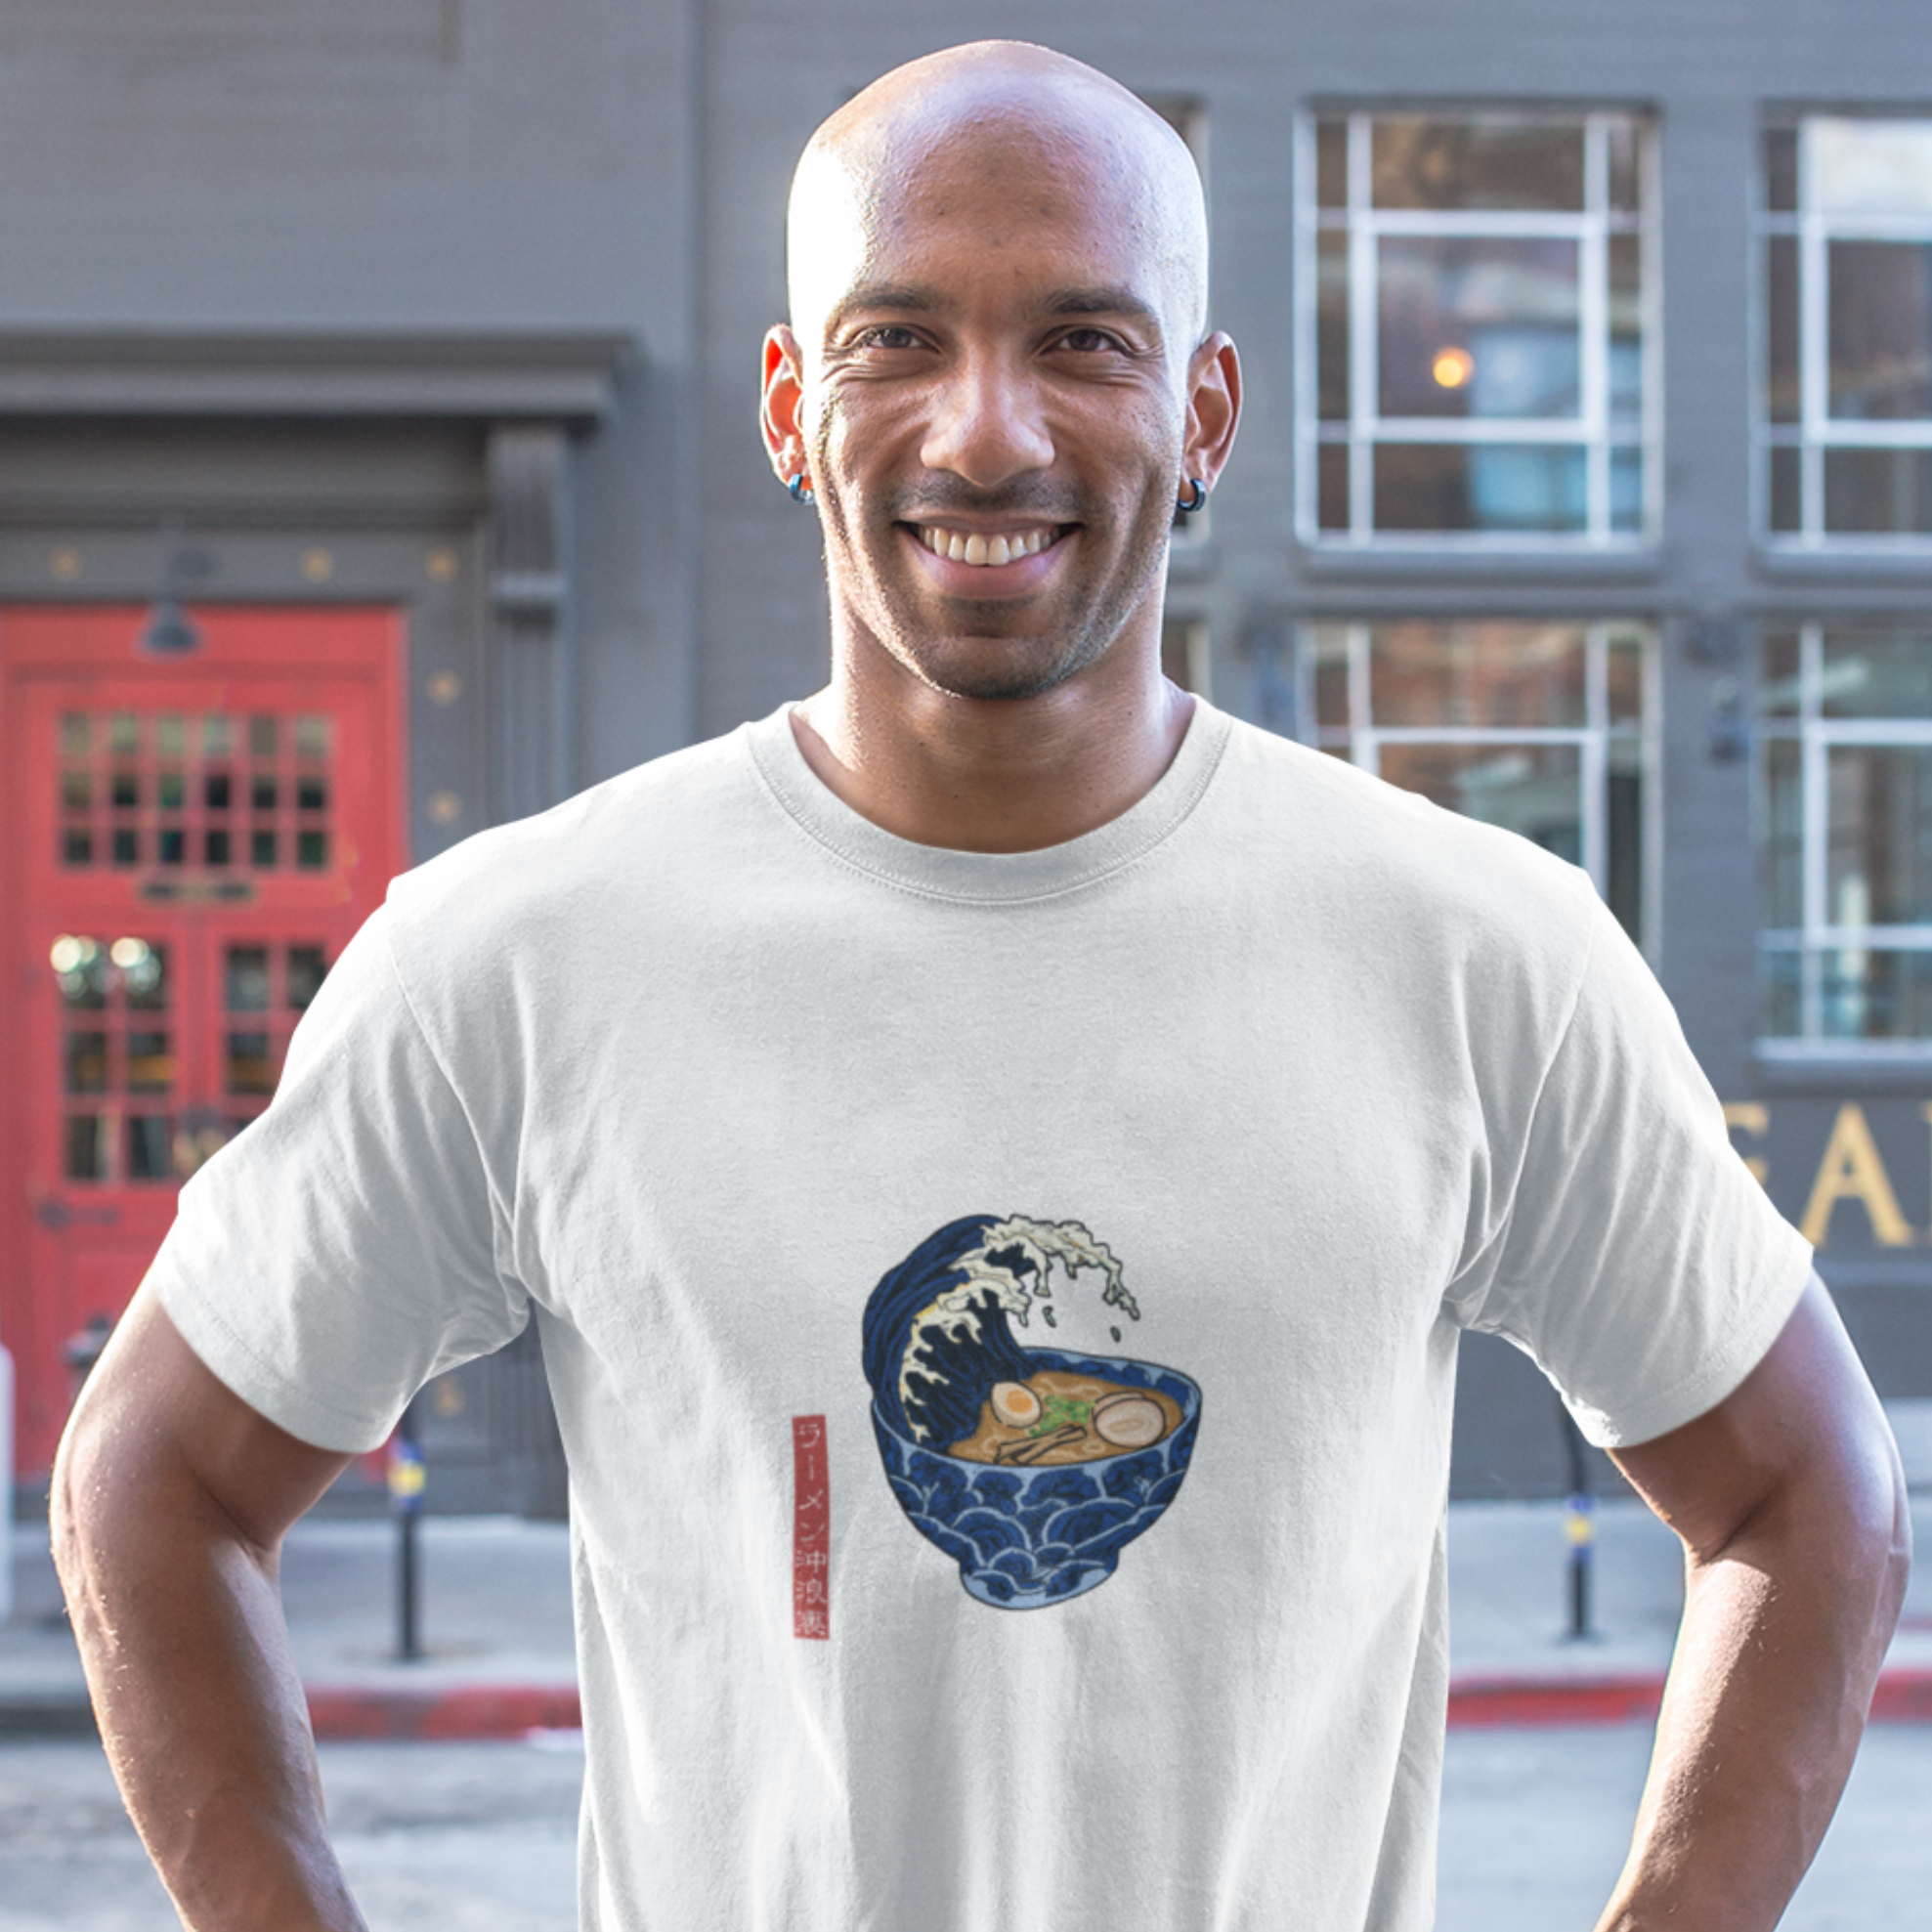 Ramen T-Shirt: Japanese-Inspired Foodie Tee with Wave and Ramen Bowl Art